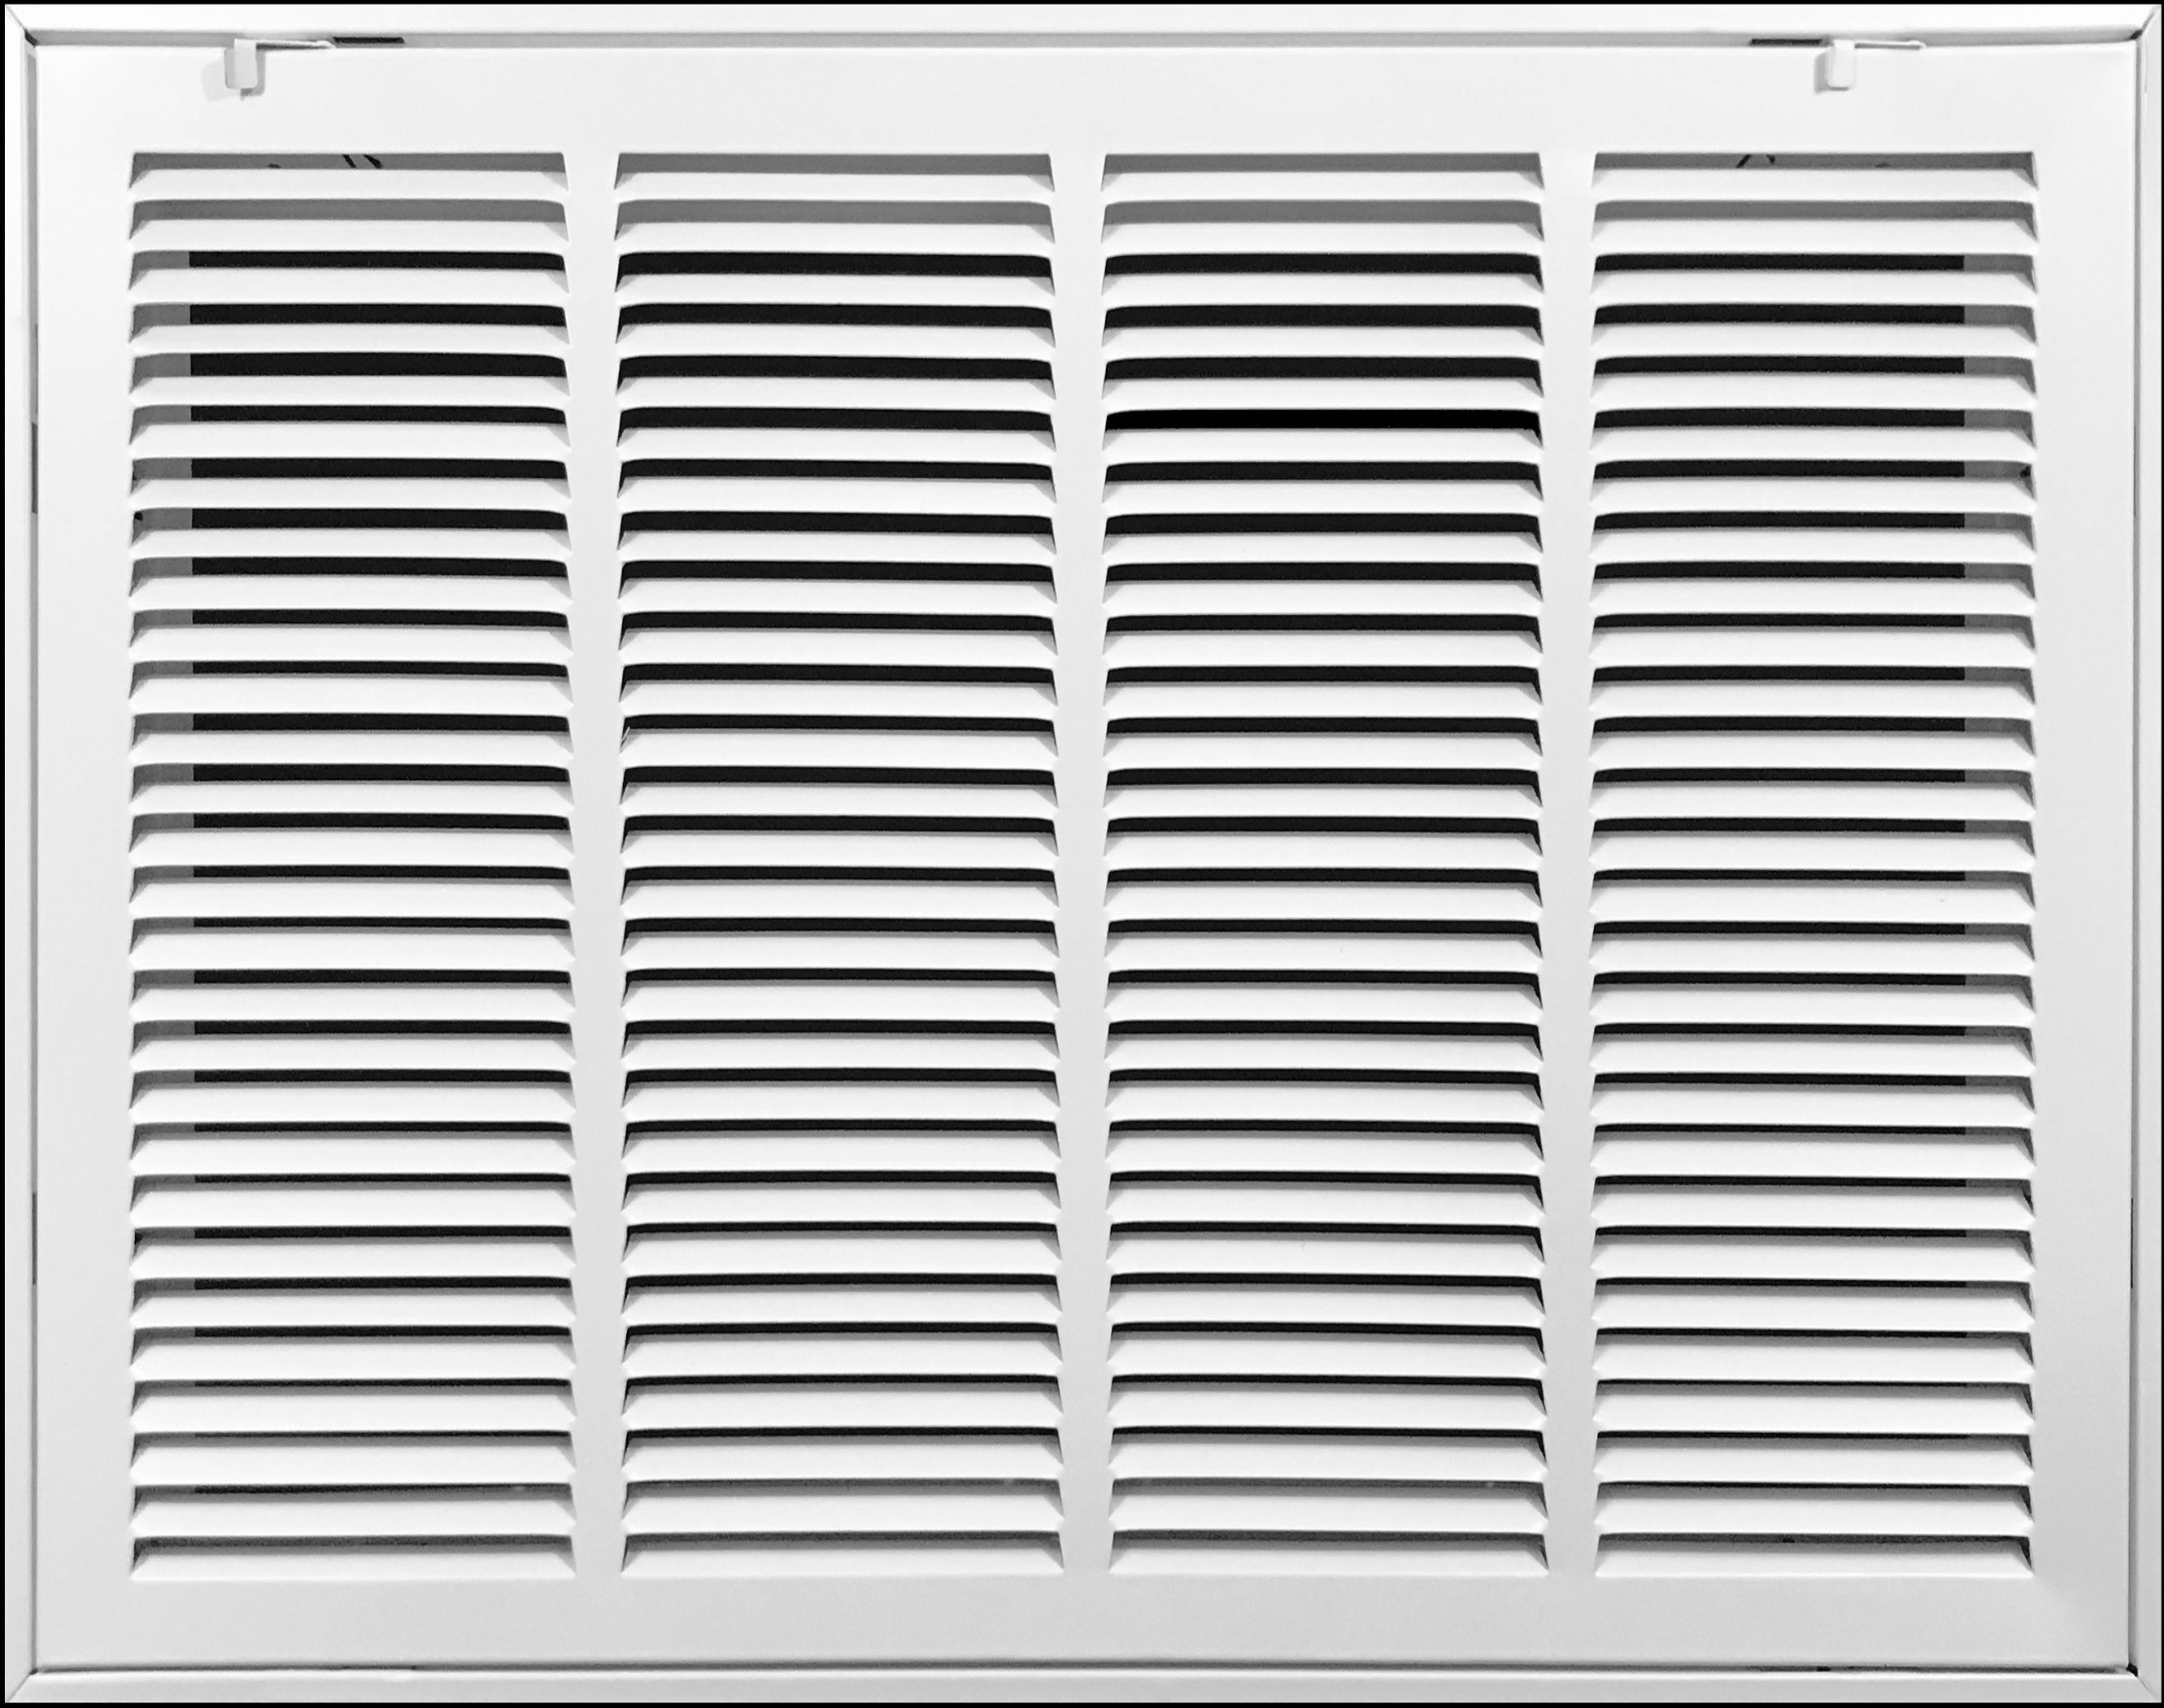 airgrilles 24" x 18" duct opening   hd steel return air filter grille for sidewall and ceiling 7hnd-rfg1-wh-24x18 038775638289 - 1